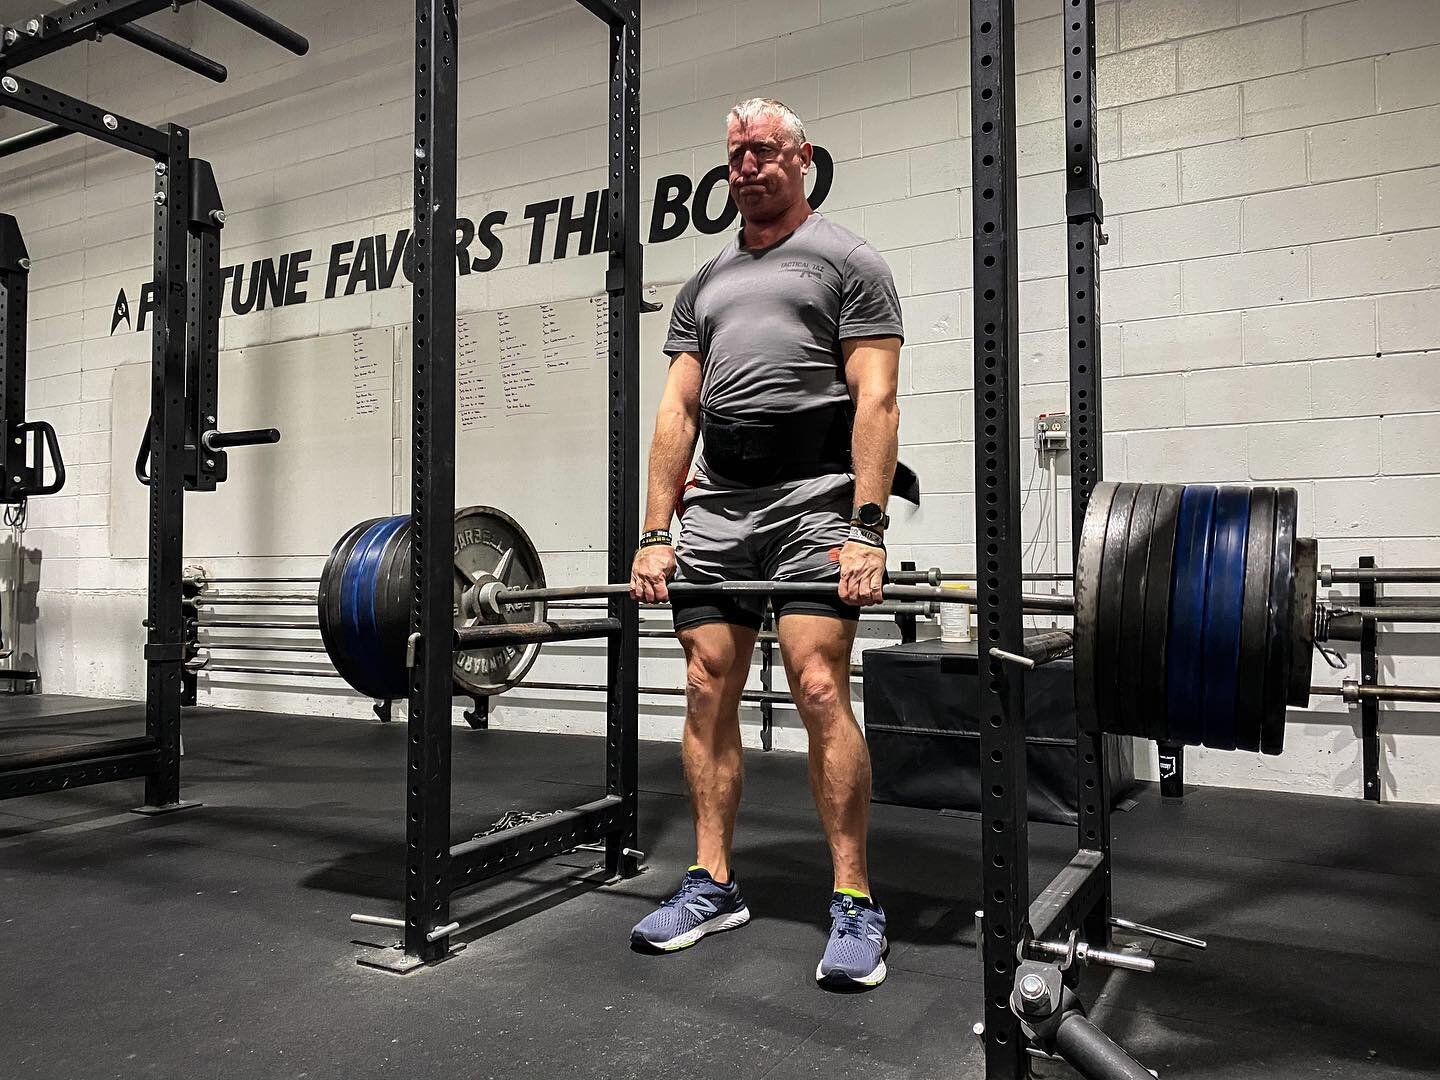 Big Man Stan. 
751# Rack Pull (Above Knee)
/
W2H Rack Pull Above Knee
Then
2x Rack Pull @ 80% +
3x Seated Box Jump @ 36&rdquo;
Six Blocks
Then
10x RDL @ 72# +
60yd Sled Drag with KBs (2x53#) in Farmer Carry Position +
100m Row Sprint +
Rest Some
Four